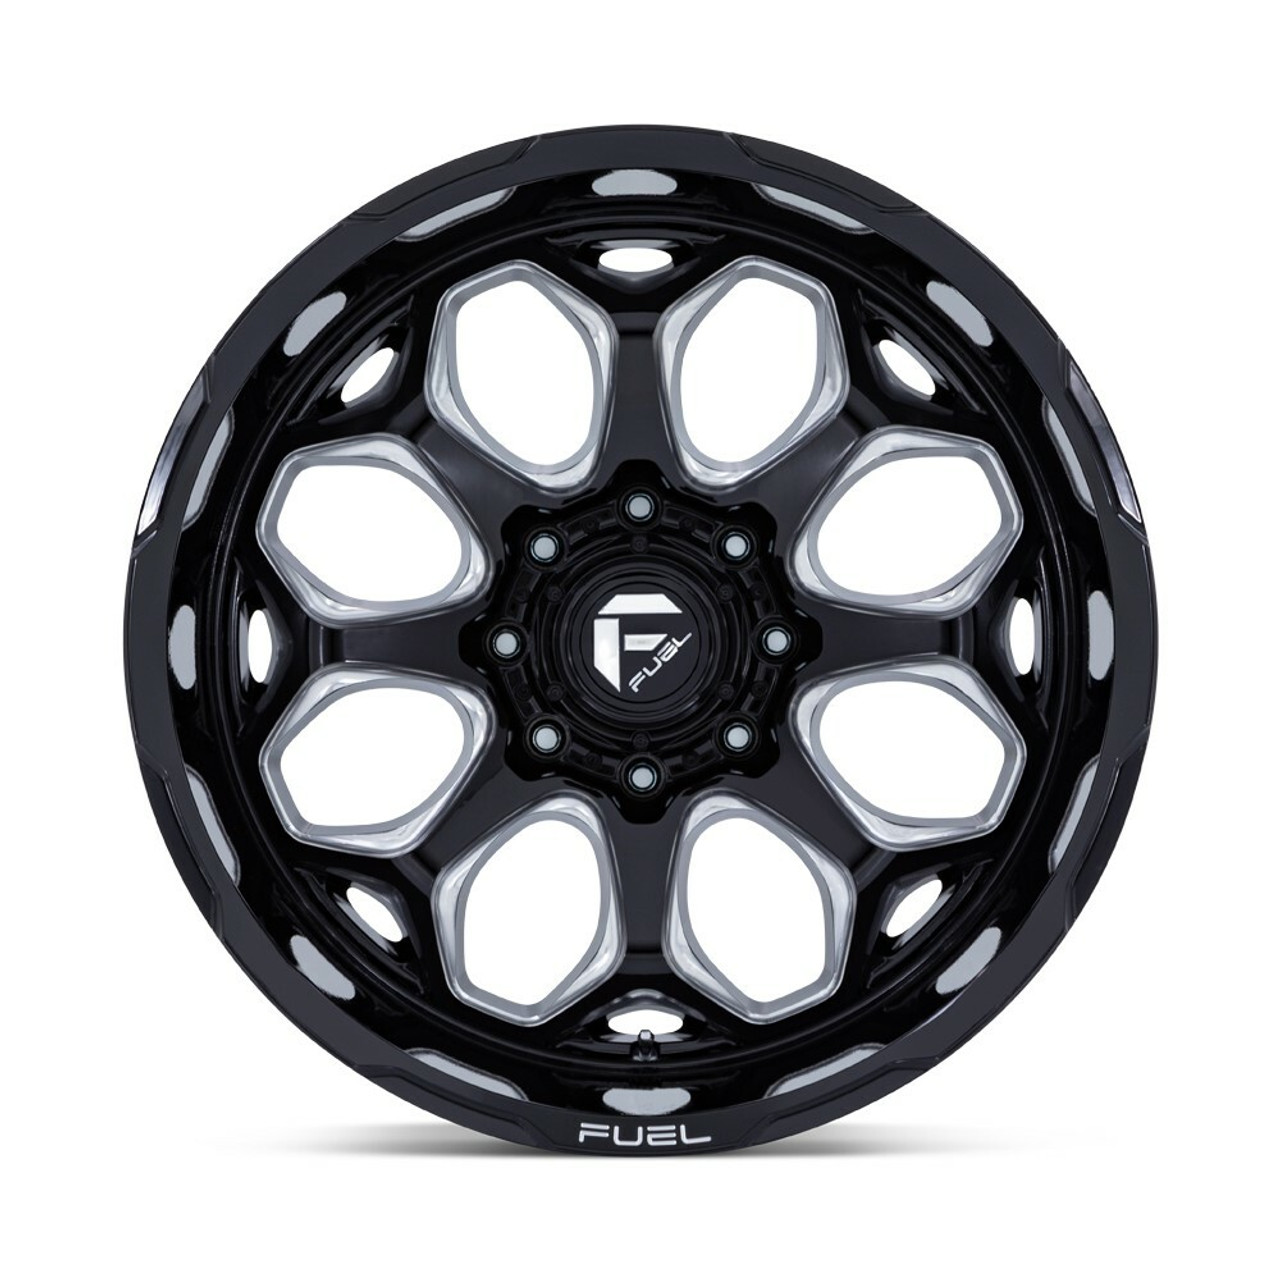 Set 4 Fuel FC862 Scepter 20x10 8x6.5 Gloss Black Milled 20" -18mm Lifted Wheels